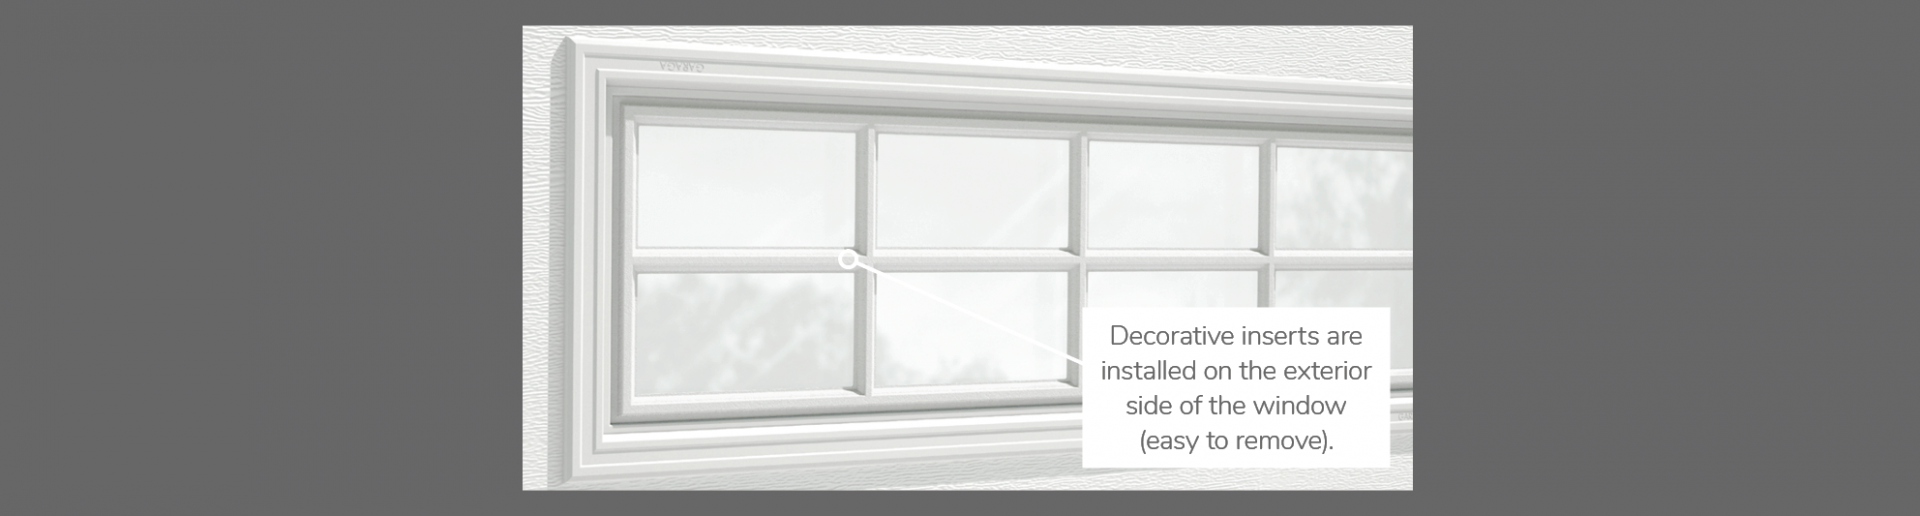 Stockton Decorative Insert, 40" x 13", 21" x 13", 41" x 16" or 20" x 13", available for door R-16, R-12, 3 layers - Polystyrene, 2 layers - Polystyrene and Non-insulated